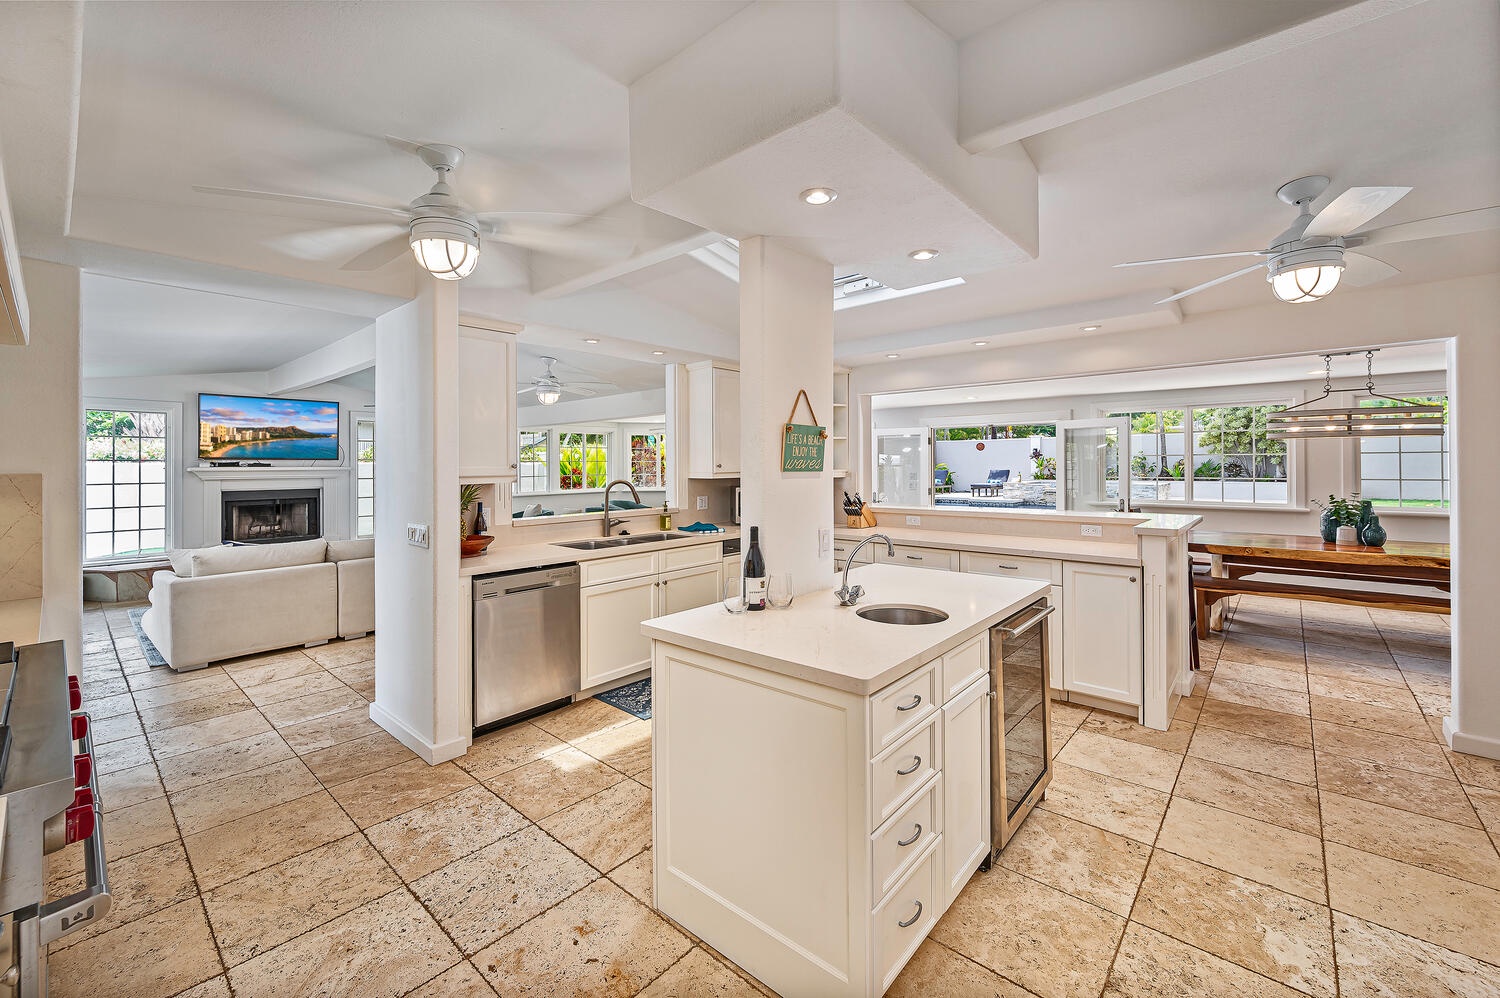 Kailua Vacation Rentals, Villa Hui Hou - Open concept chefs kitchen with top of the line appliances.